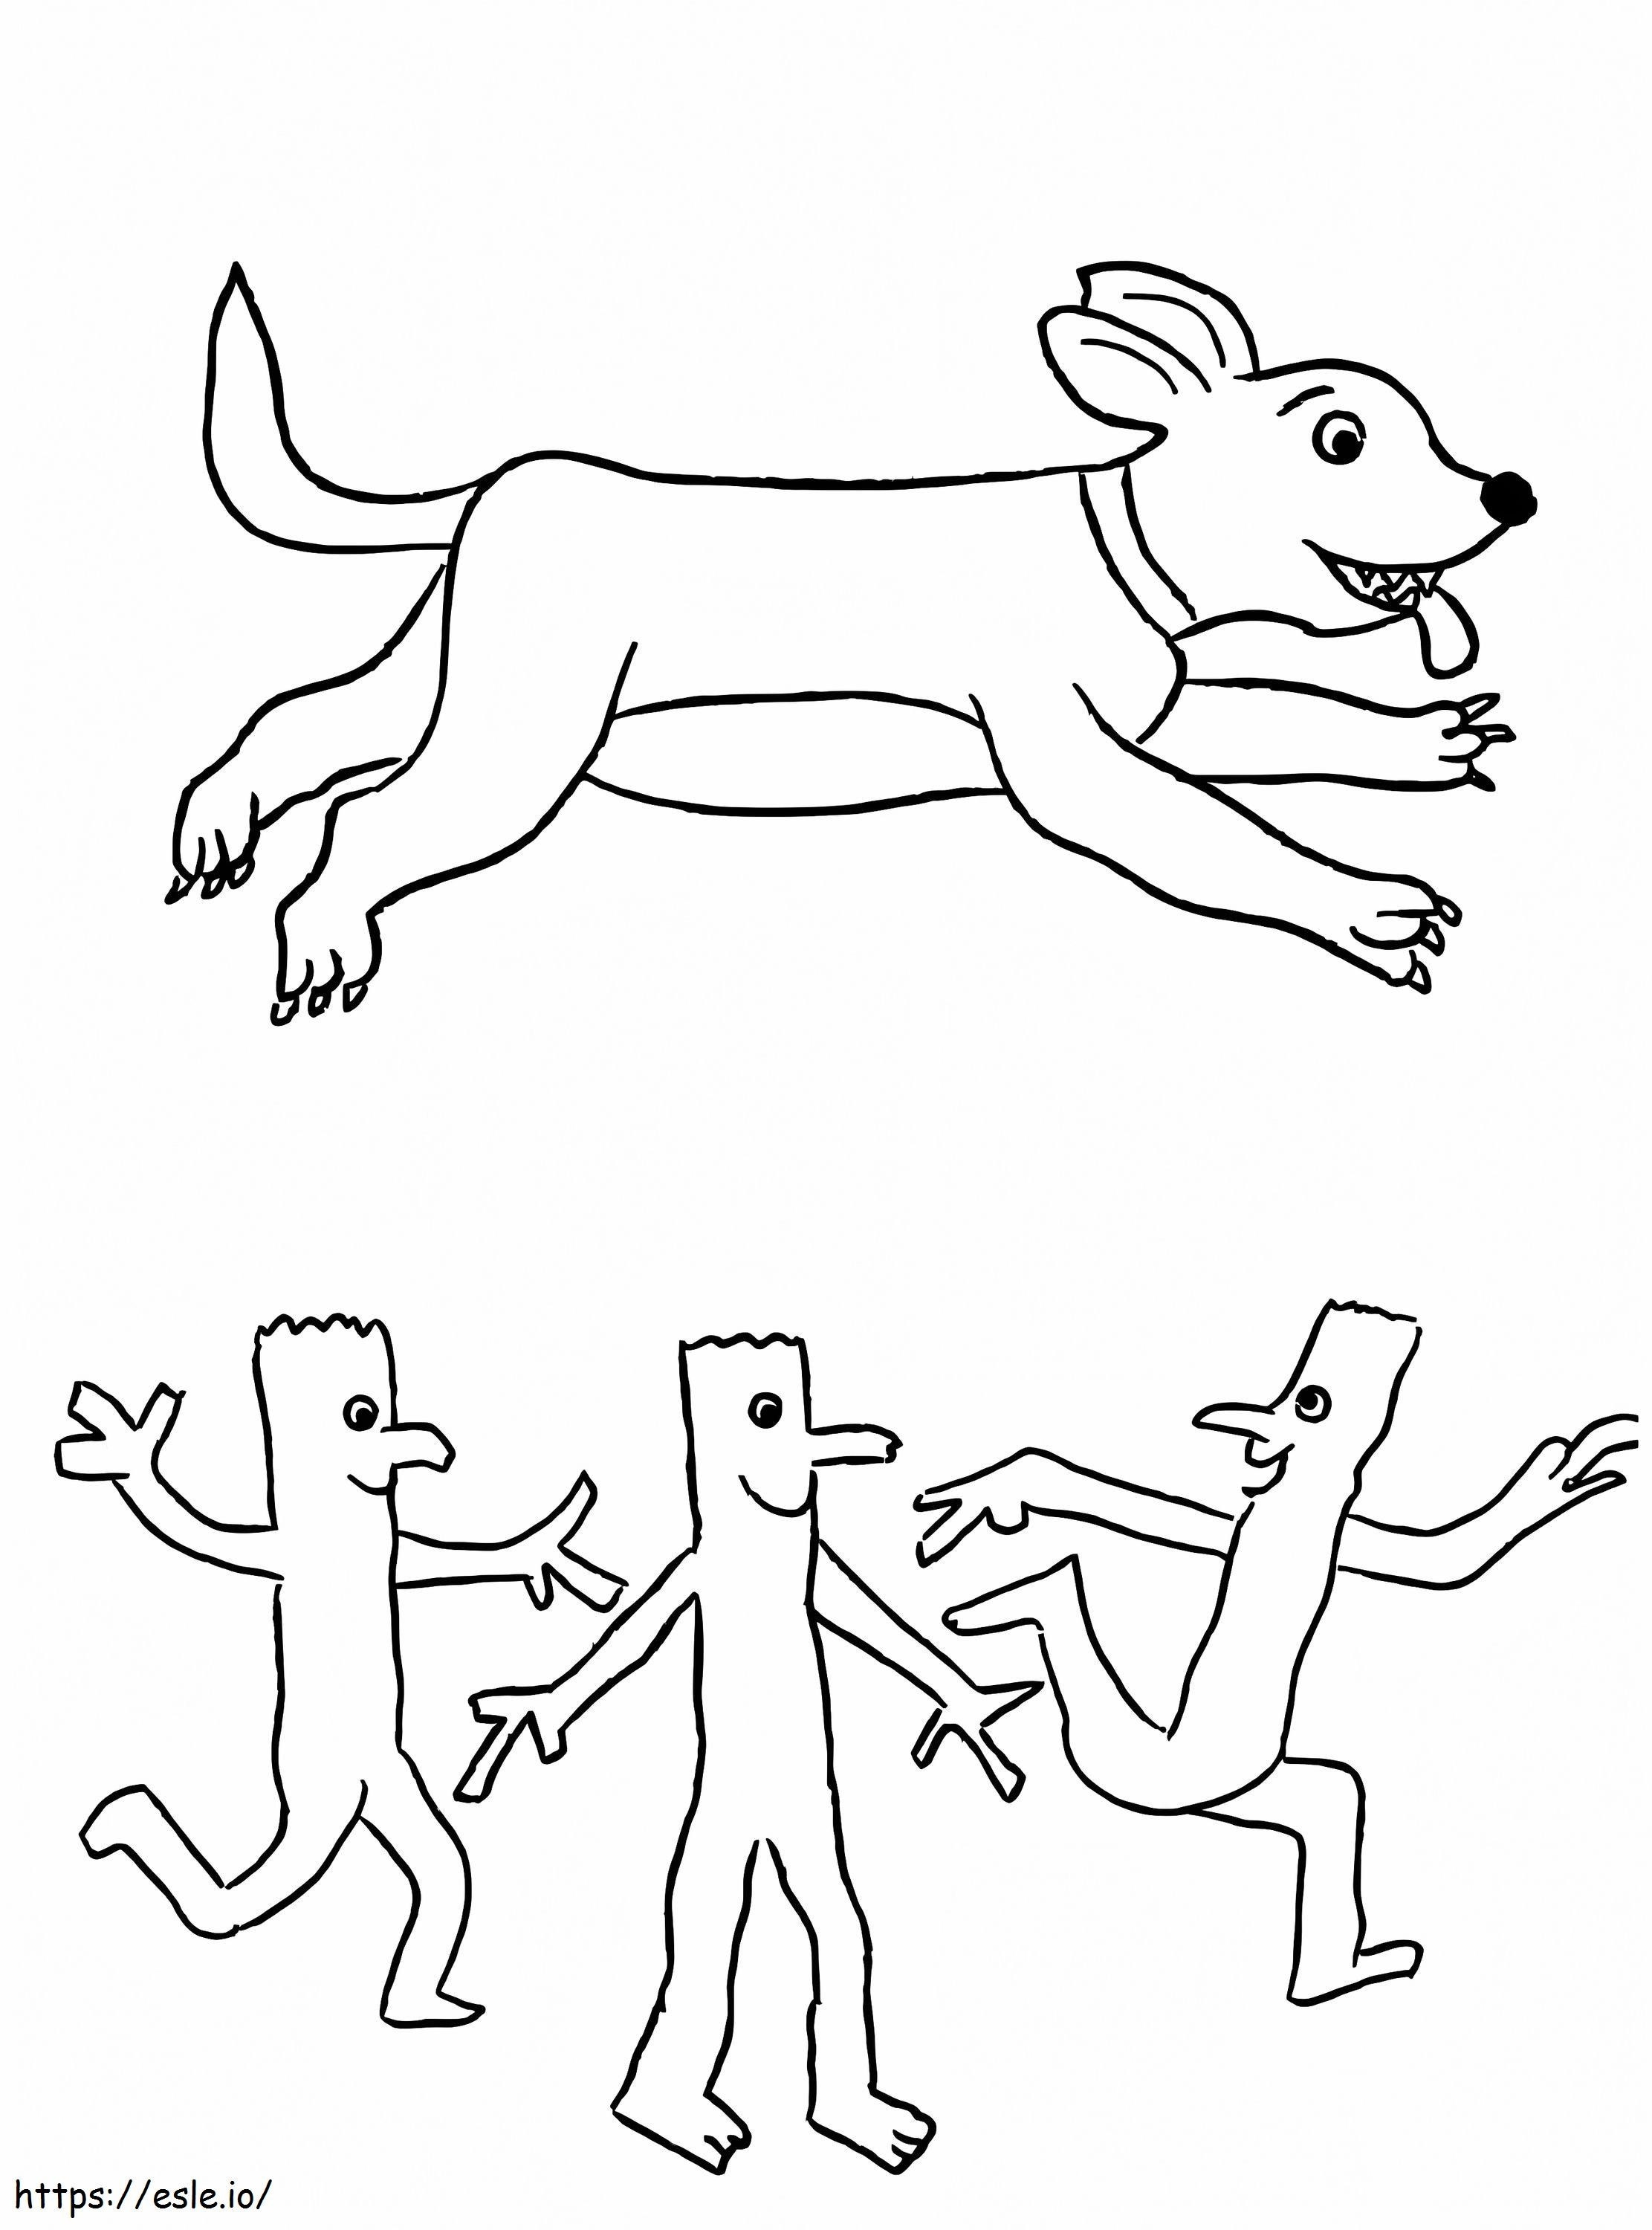 Stick Children And Dog coloring page